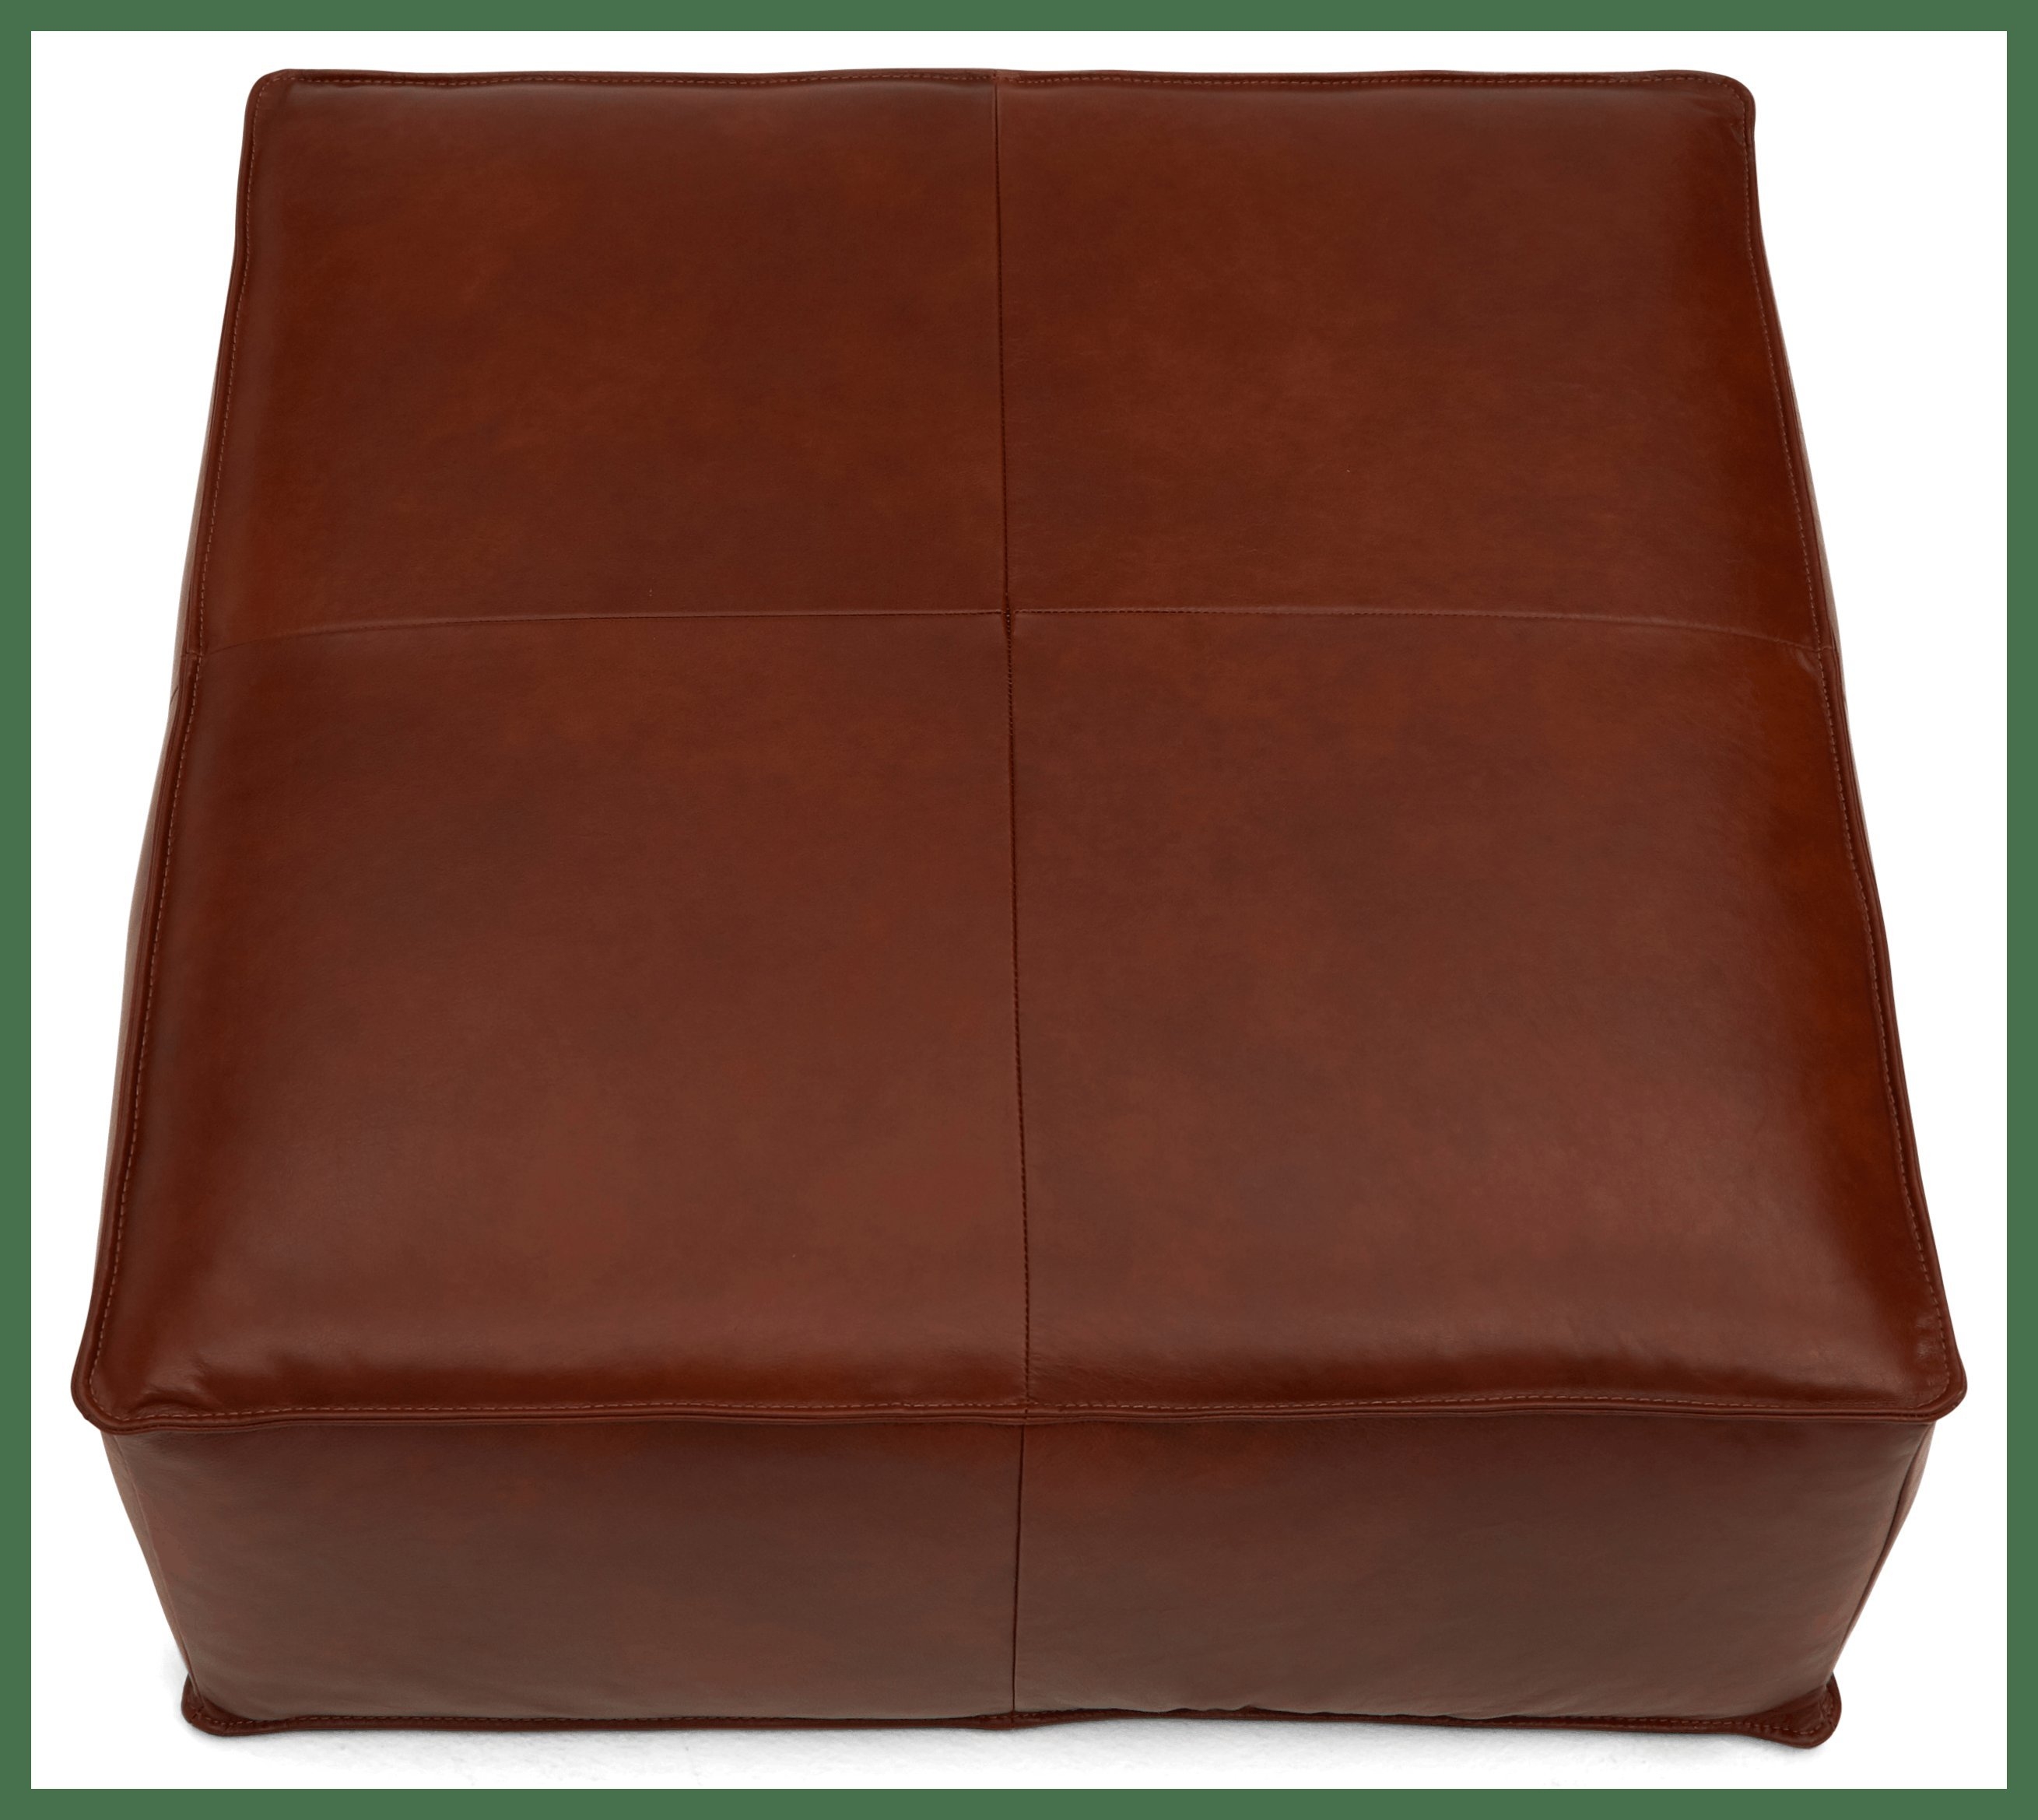 Lyle Mid Century Modern Leather Ottoman - Olympia Camel - Image 2